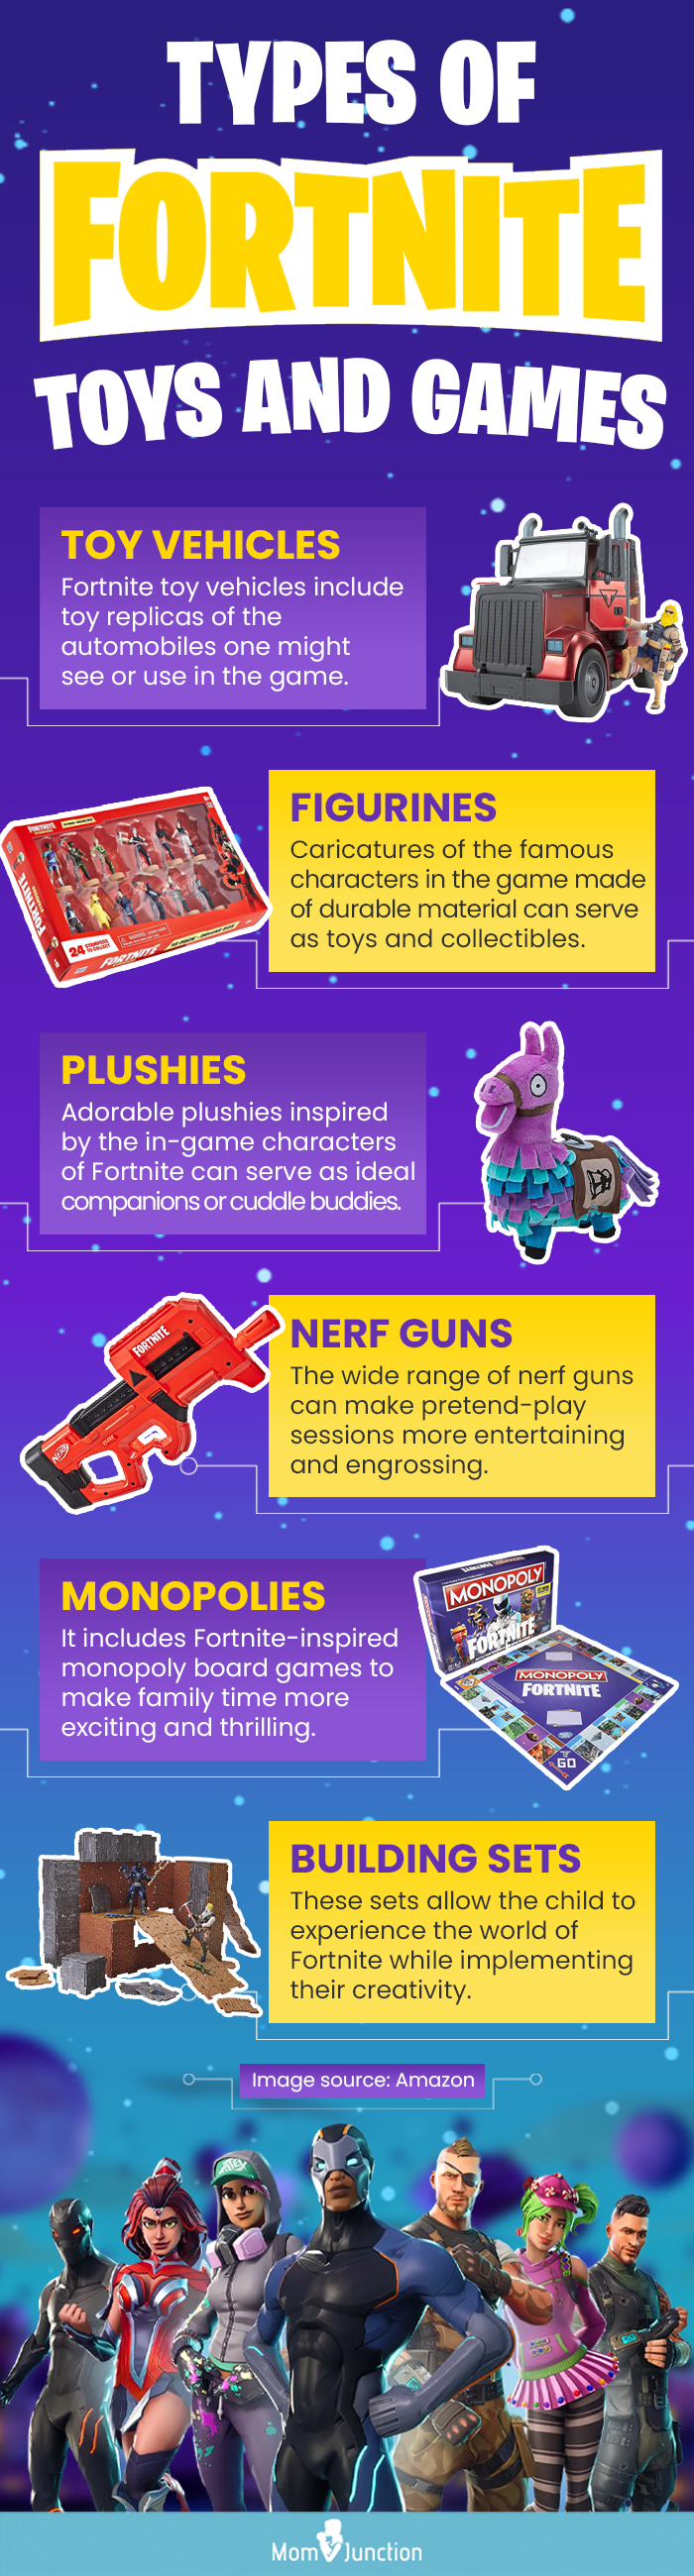 Types Of Fortnite Toys And Games (infographic)